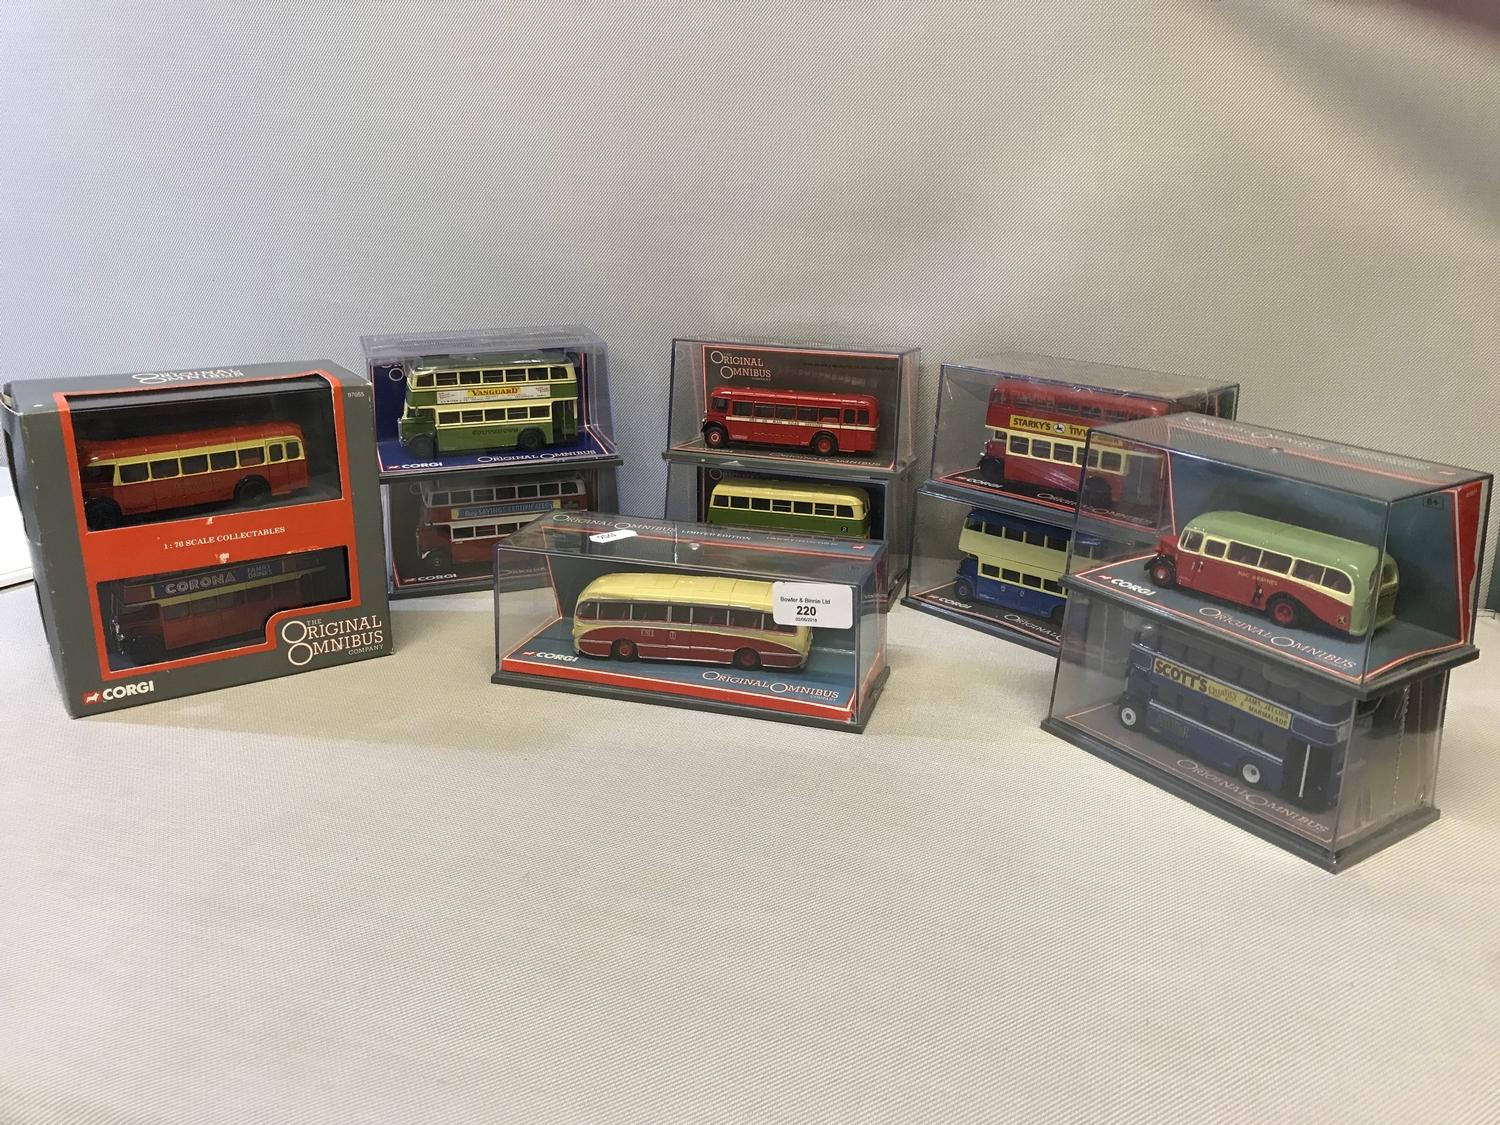 A lot of 9 'The Original Omnibus' Corgi bus models, together with a double bus model set